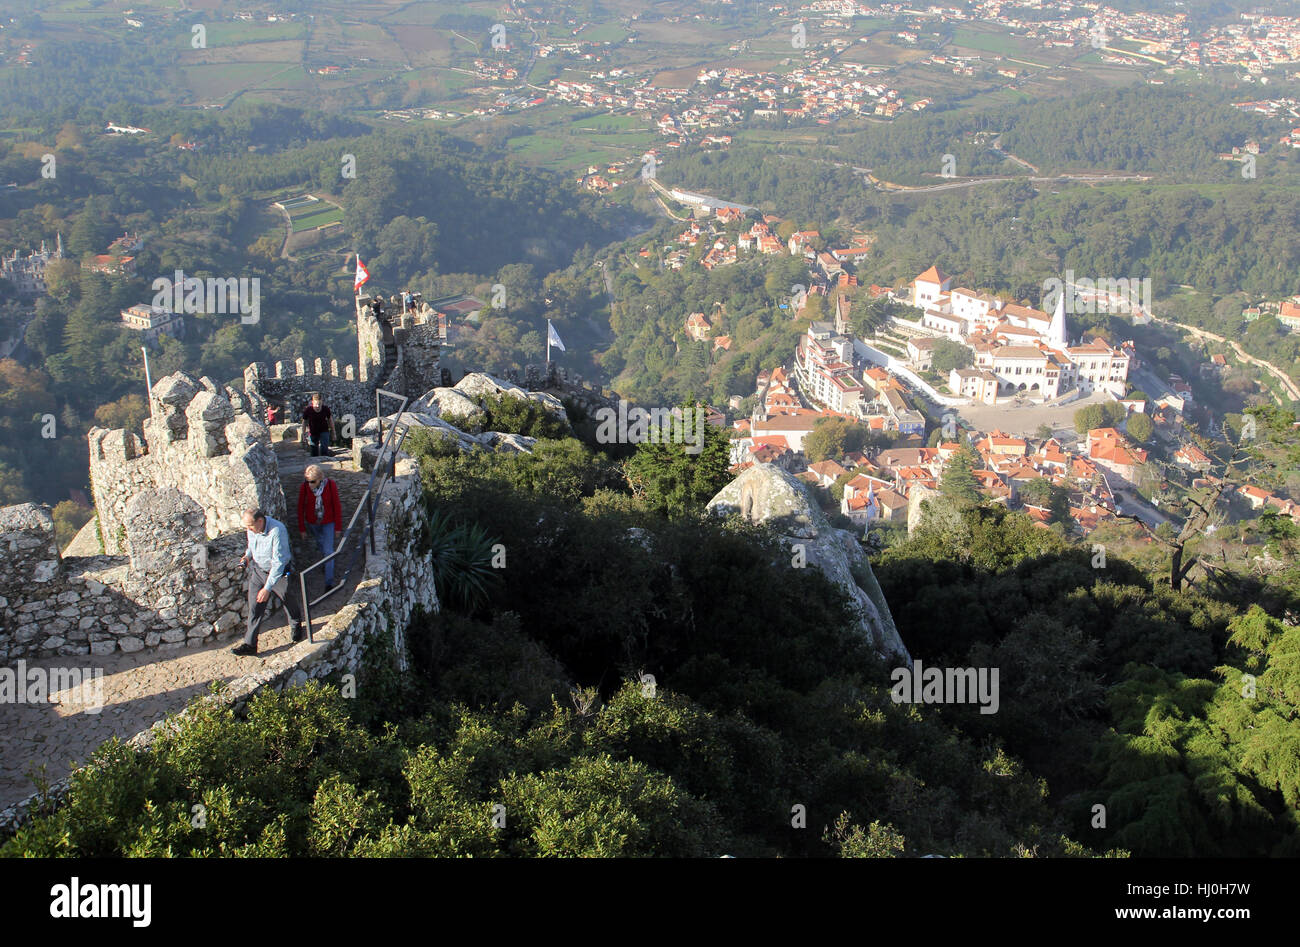 Sintra, Portugal. 11th Dec, 2015. Vie from Castelo dos Mouros, one of the hilltop palaces built by the Moors in the 8th or 9th century on the Palacio Nacional de Sintra in Sintra, Portugal, 11 December 2015. Since 1995, the cultural landscape of Sintra has been on the UNESCO list of world heritage sites. - NO WIRE SERVICE - Photo: Hauke Schröder/dpa-Zentralbild/ZB/dpa/Alamy Live News Stock Photo